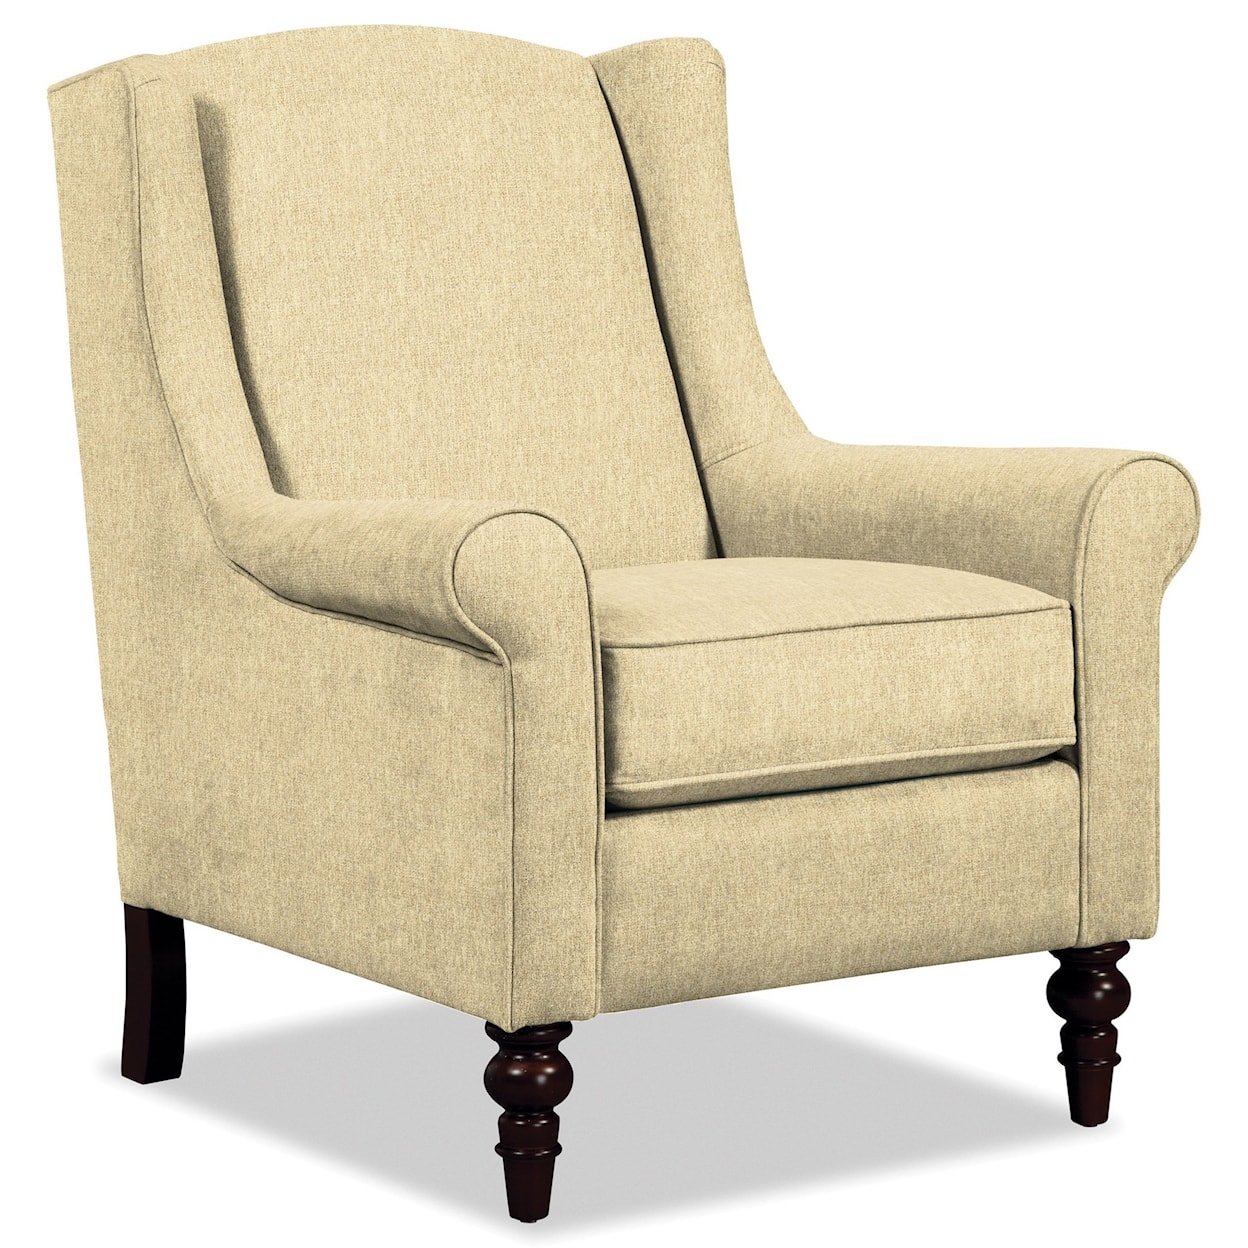 Hickory Craft 058710 Chair